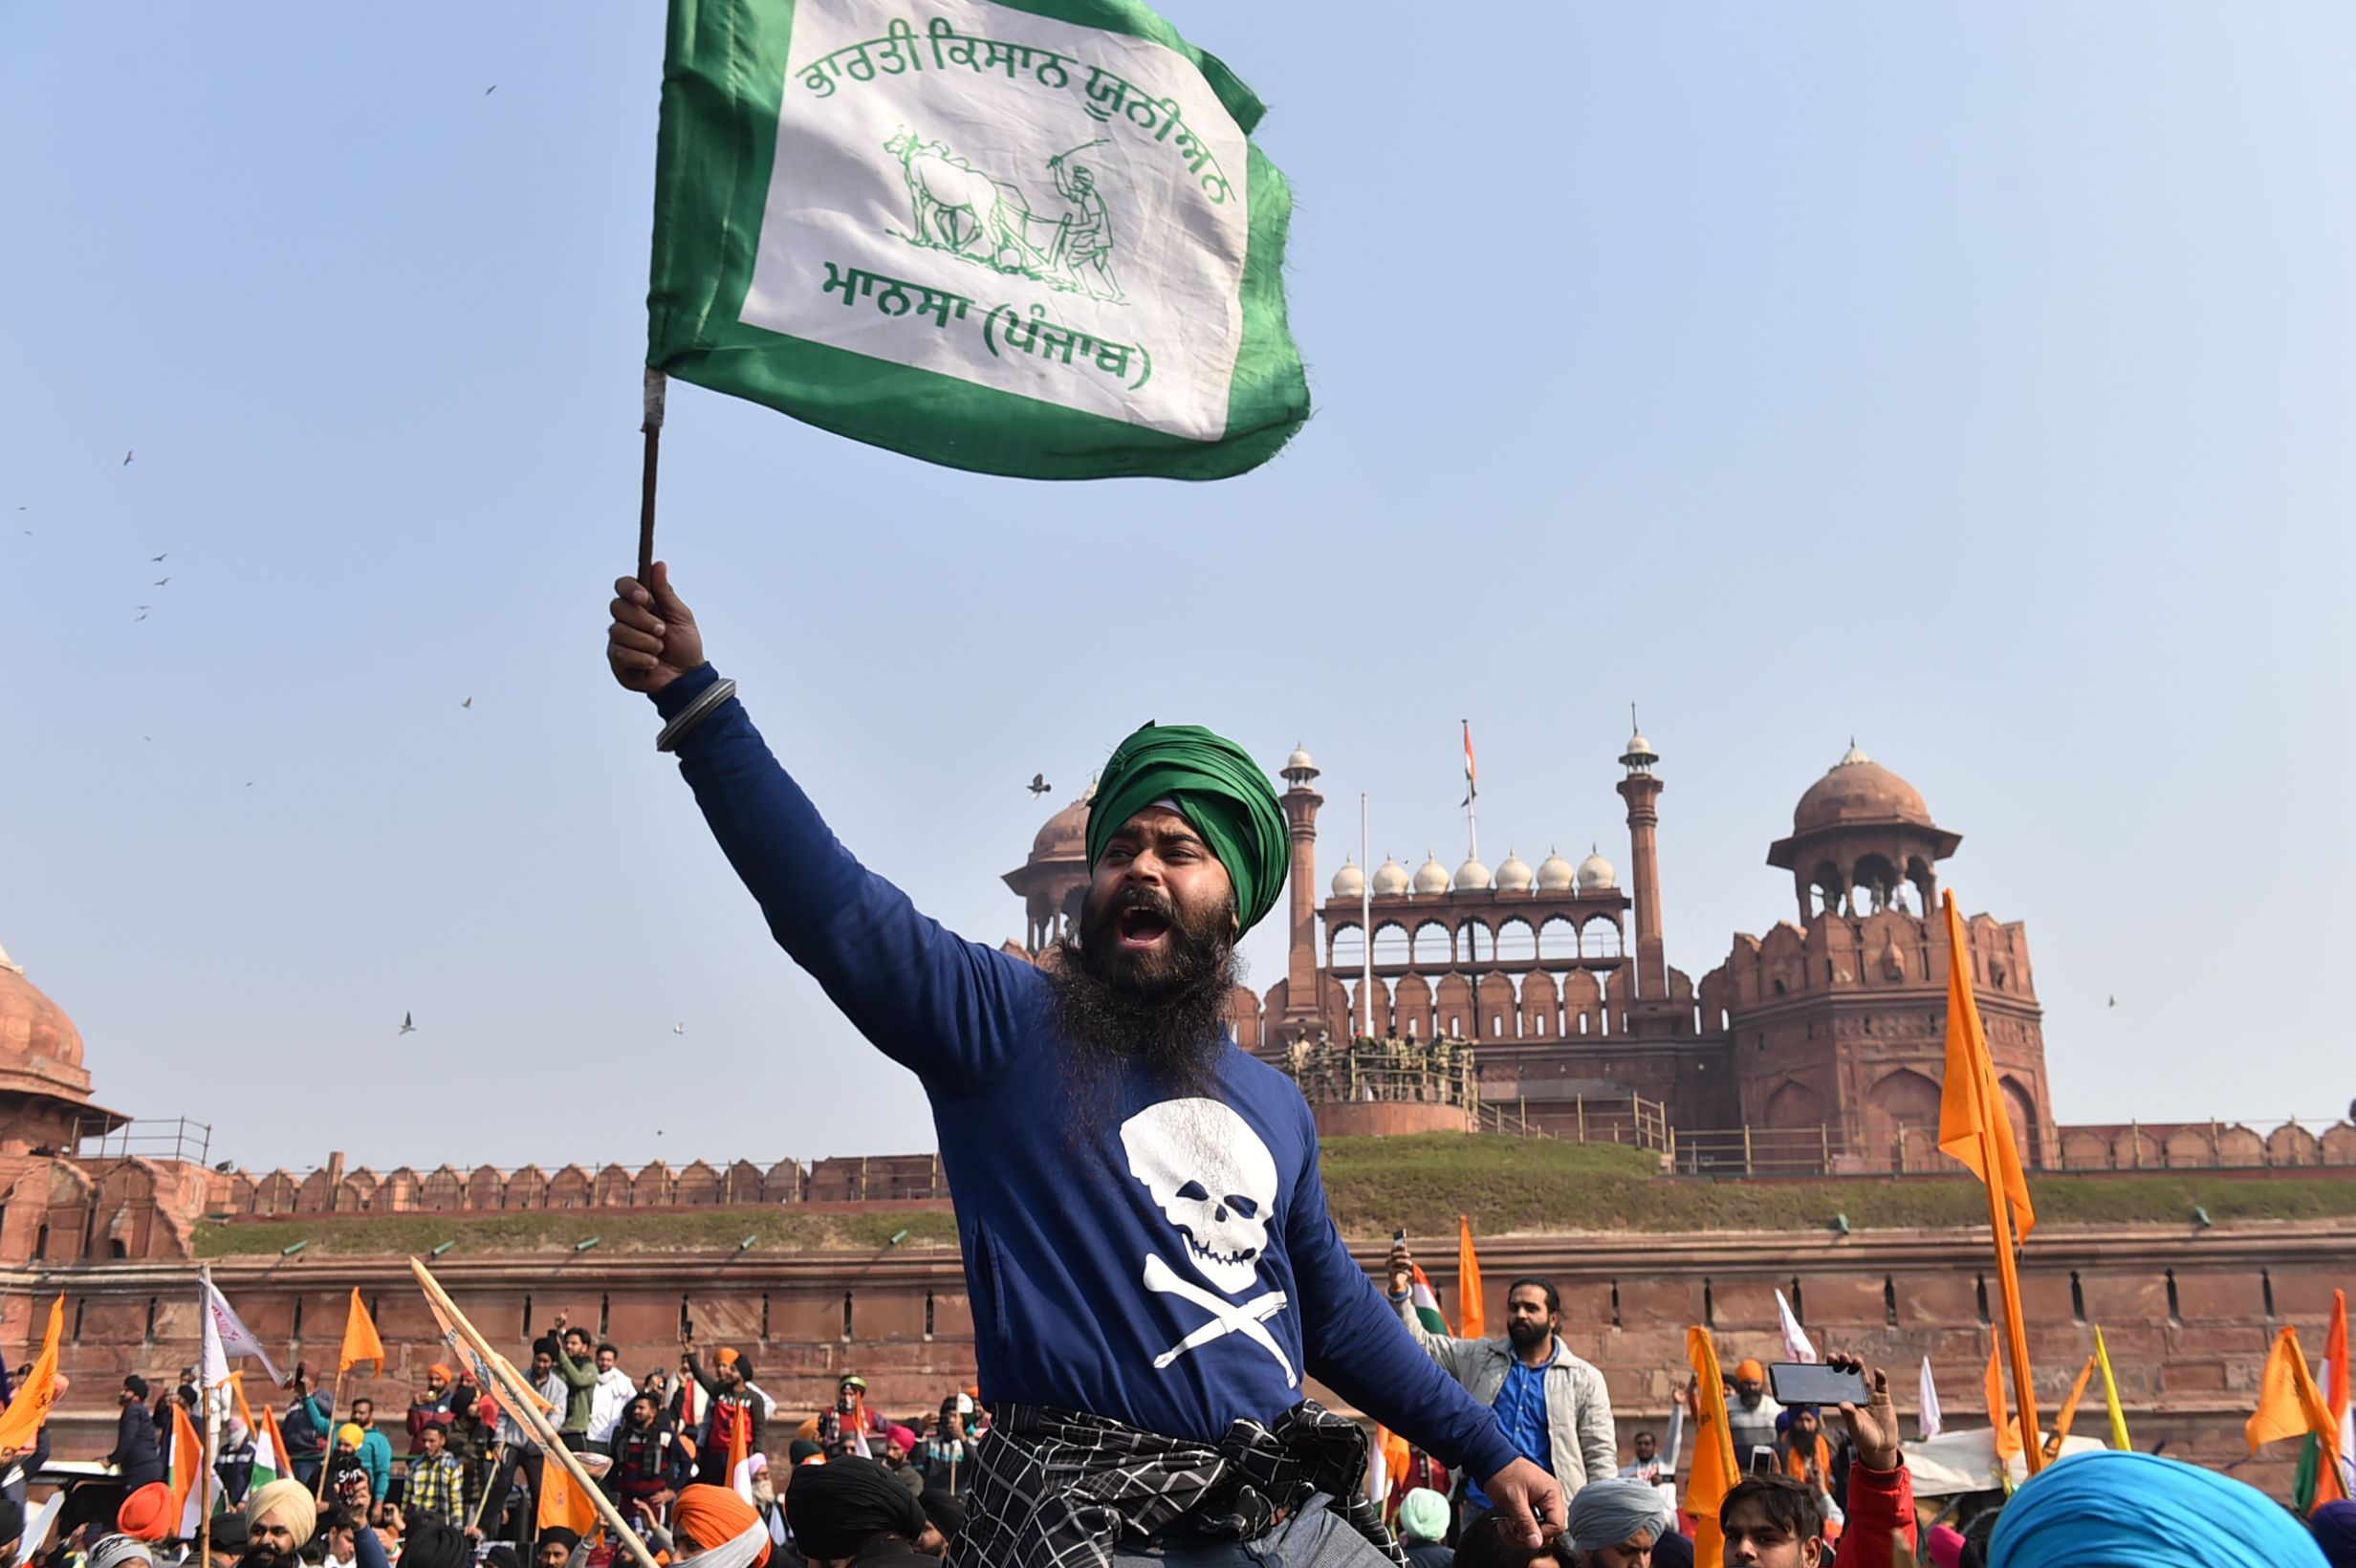 Did farmers hoist a Khalistani flag at Red Fort on Republic Day?